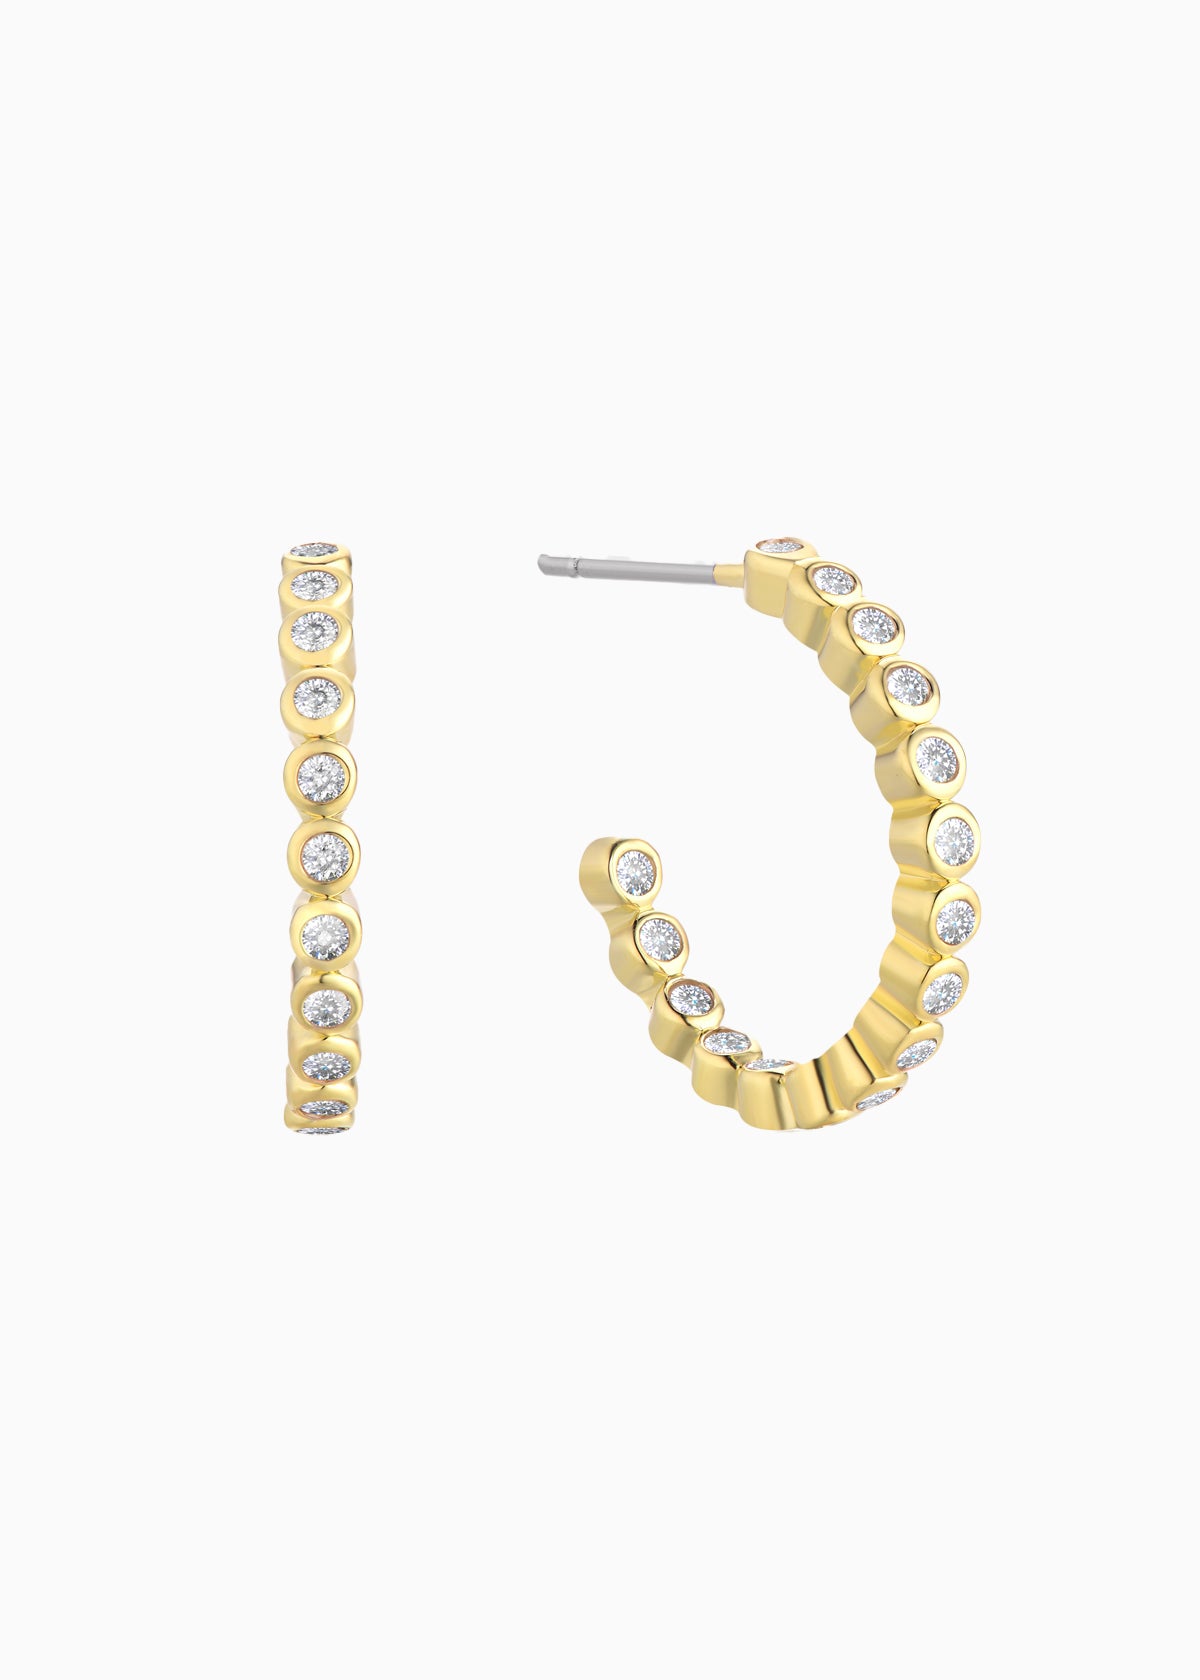 The Delta Crystal Hoops